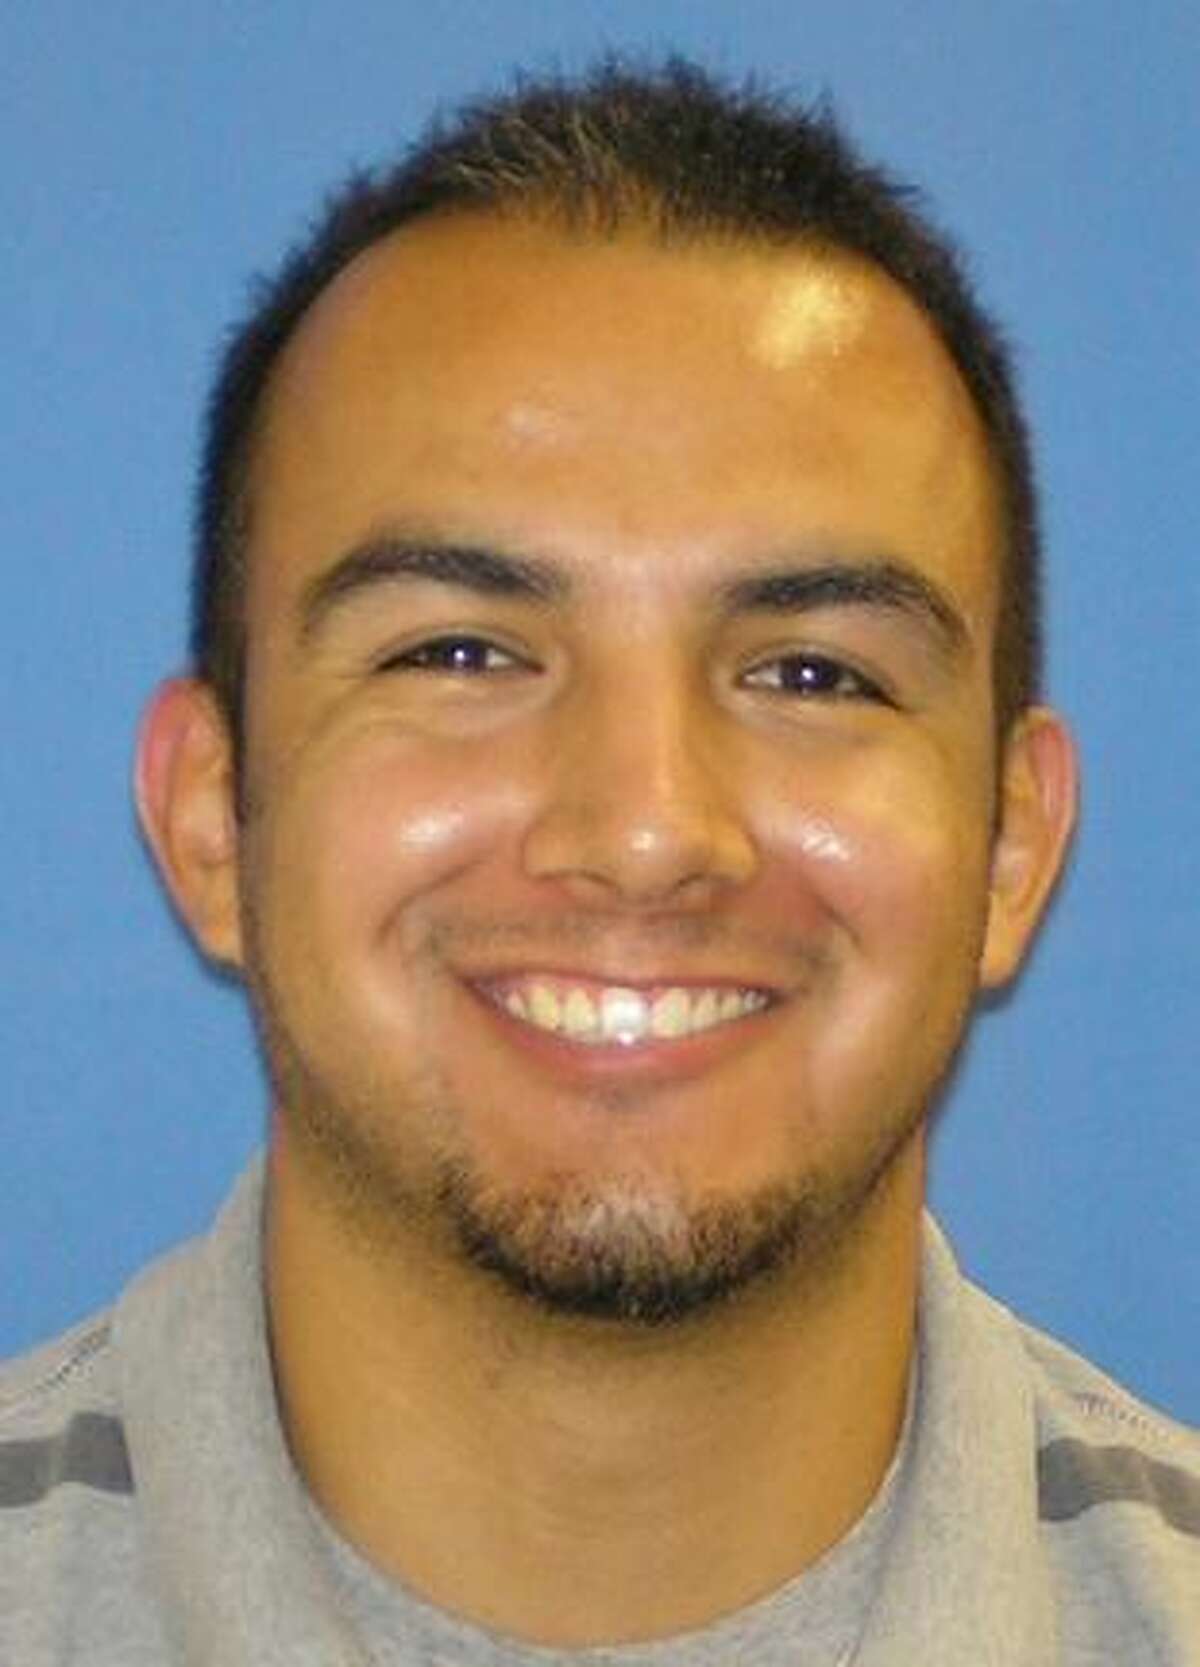 On Monday, El Paso ISD police arrested Joel Provencio, a 31-year-old former teacher at Jefferson High School, on a charge of improper relationship between an educator and student, according to El Paso County jail records.